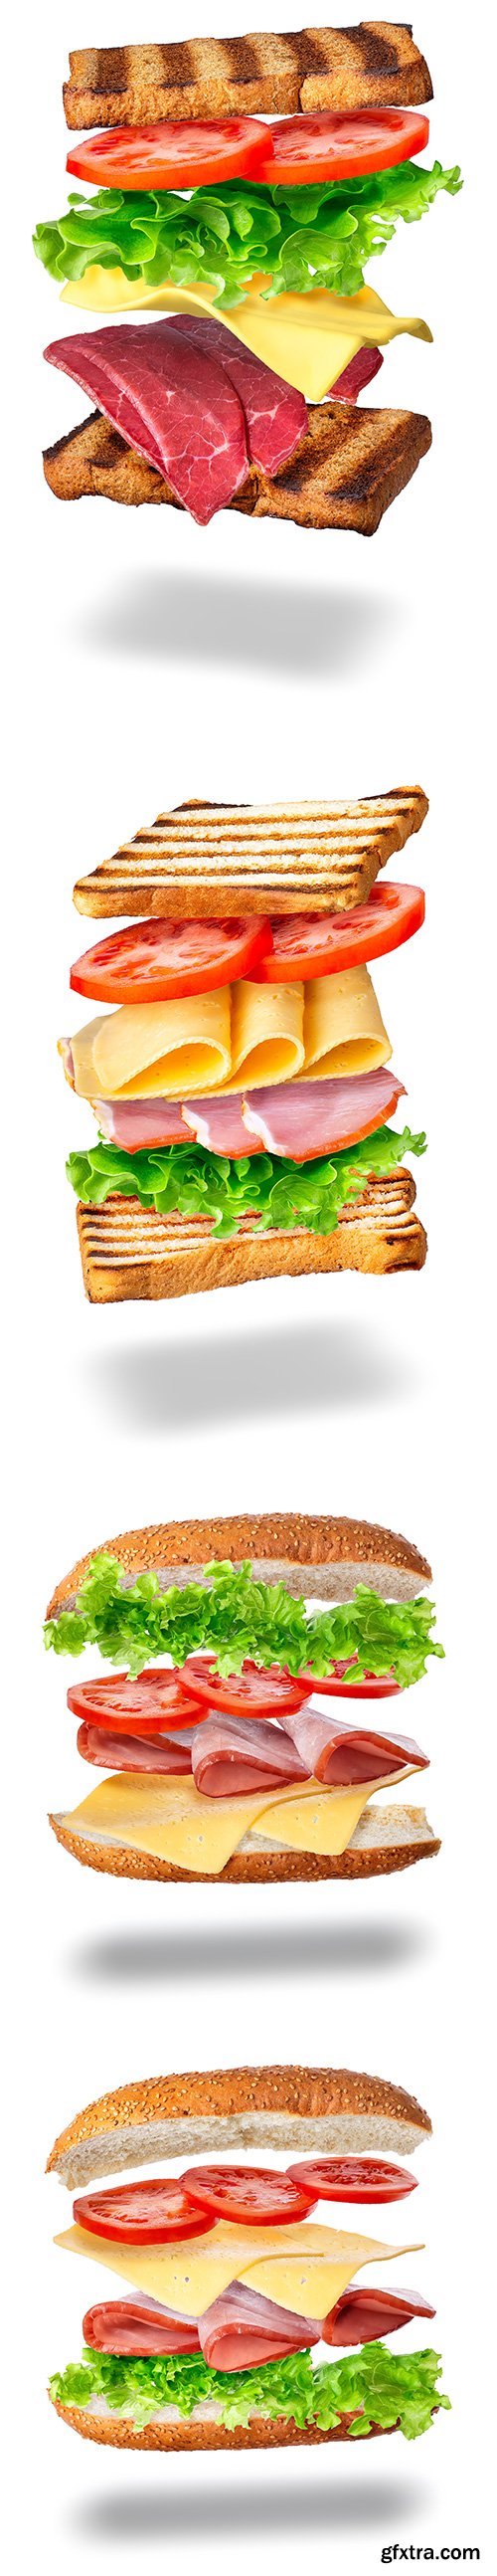 Sandwich With Flying Ingredients Isolated - 7xJPGs